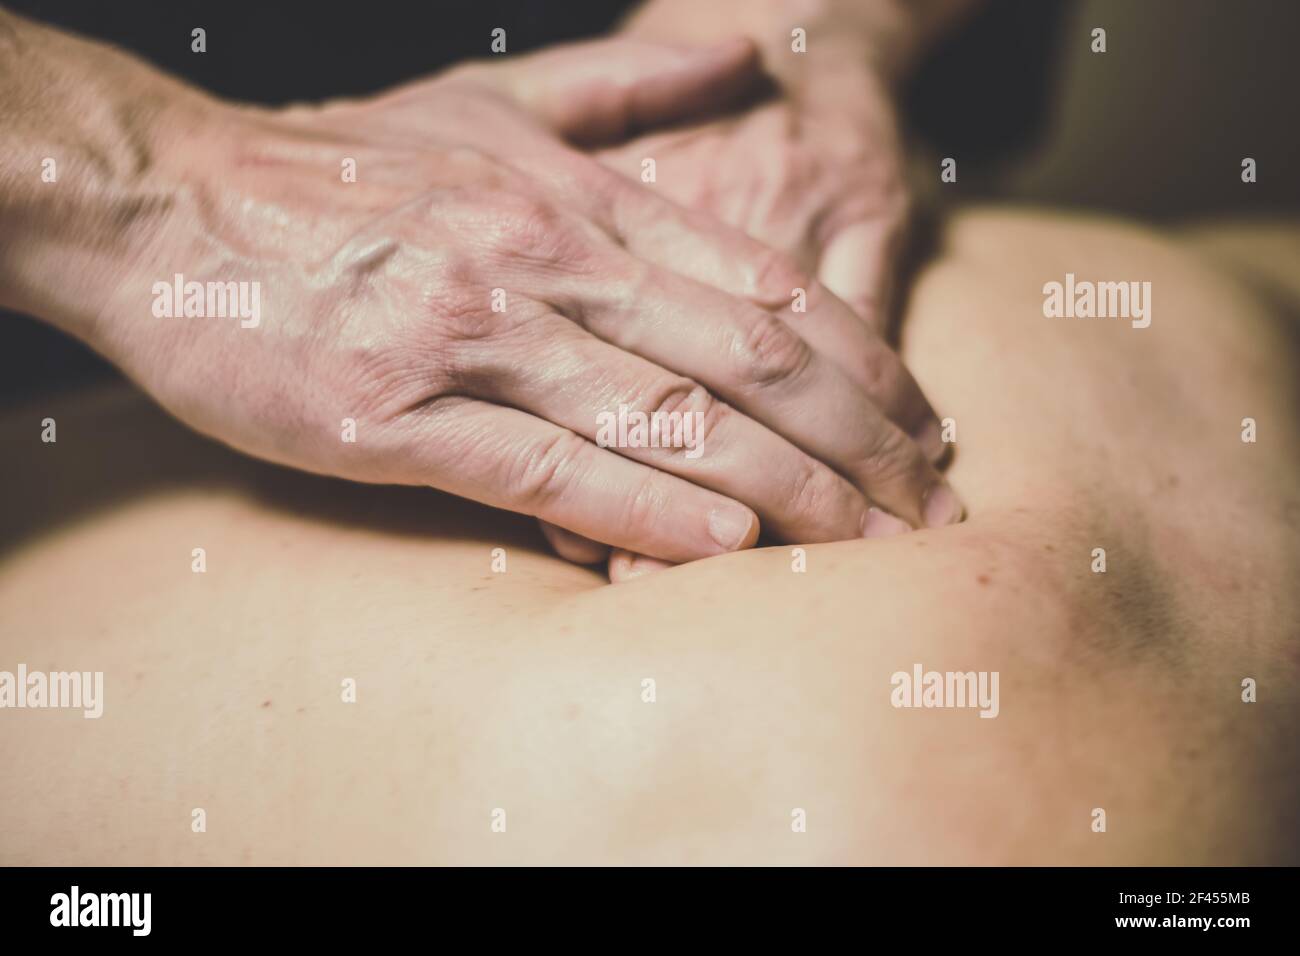 Masseur massaging back of female with oiled hands Stock Photo. 